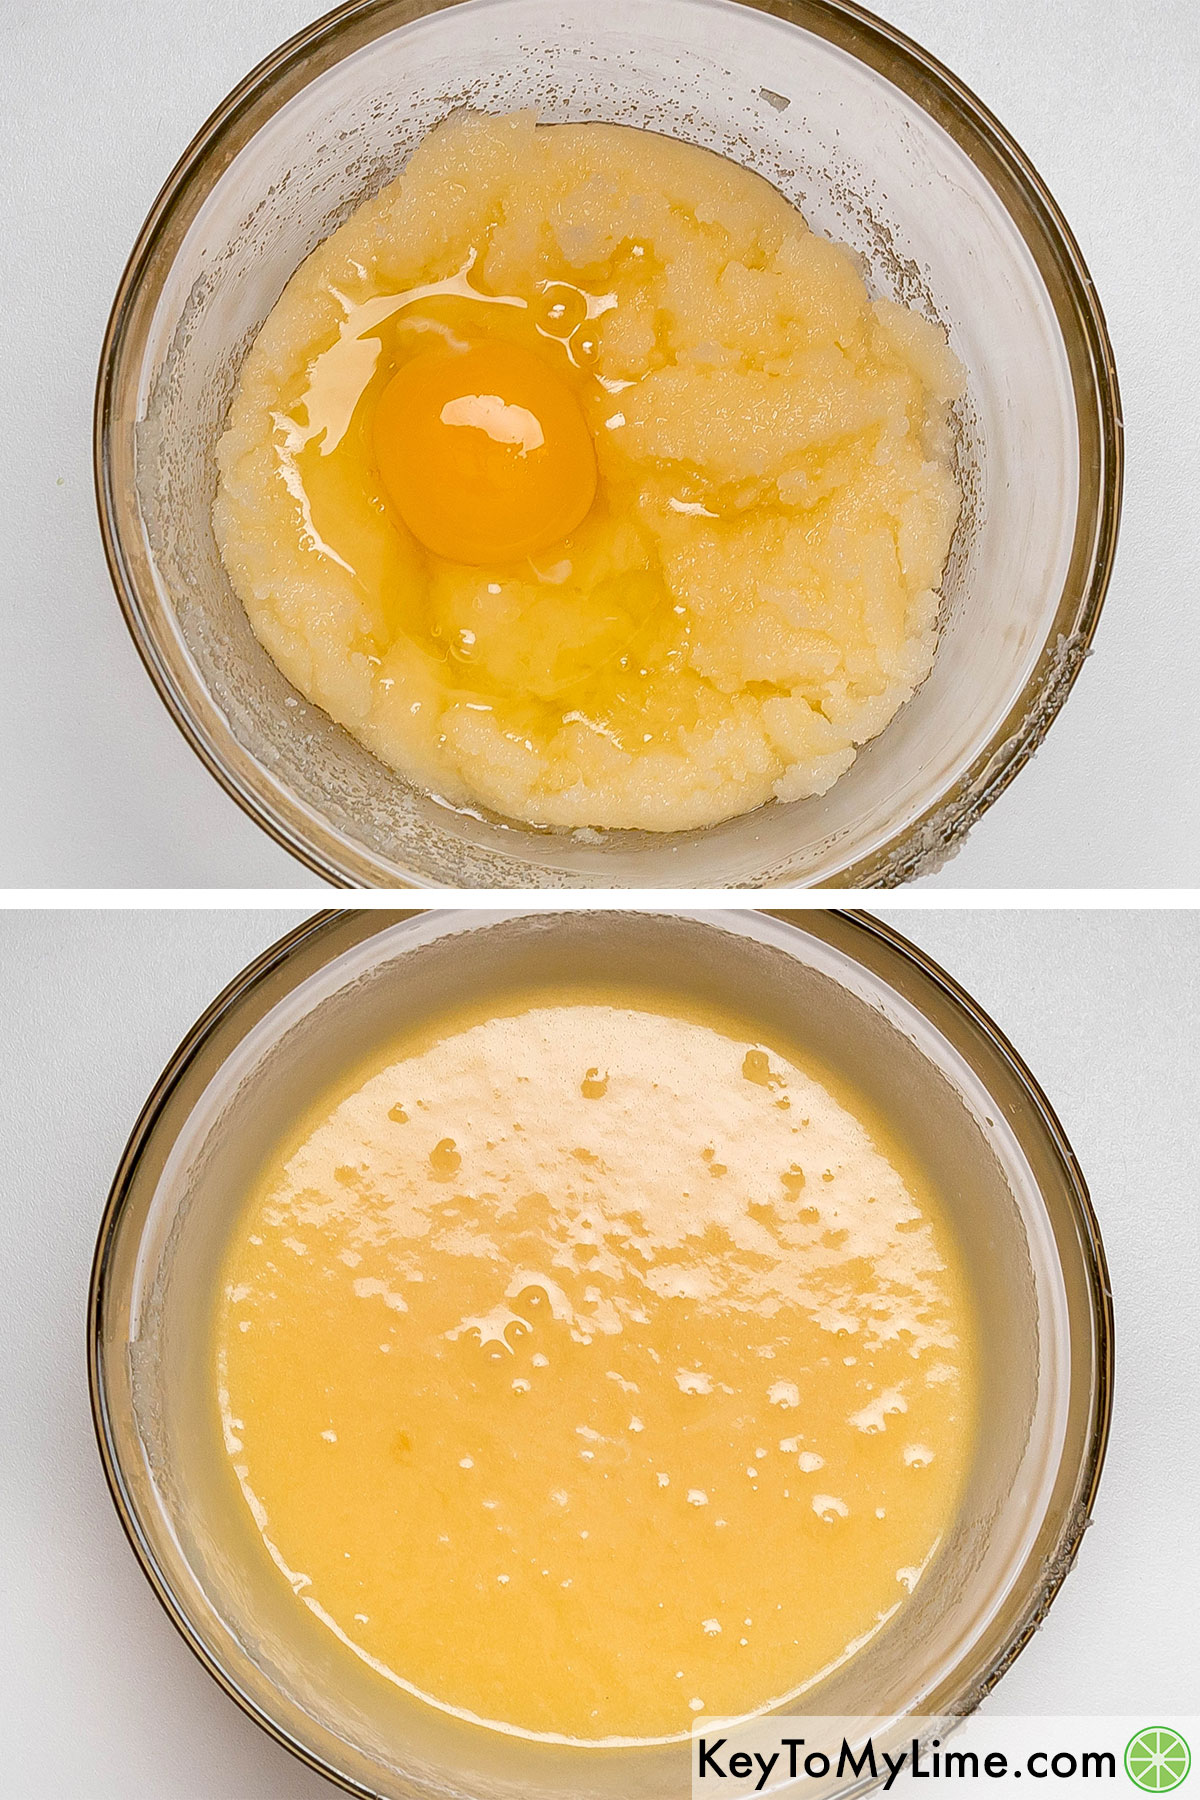 Adding one egg at a time until the mixture is incorporated.